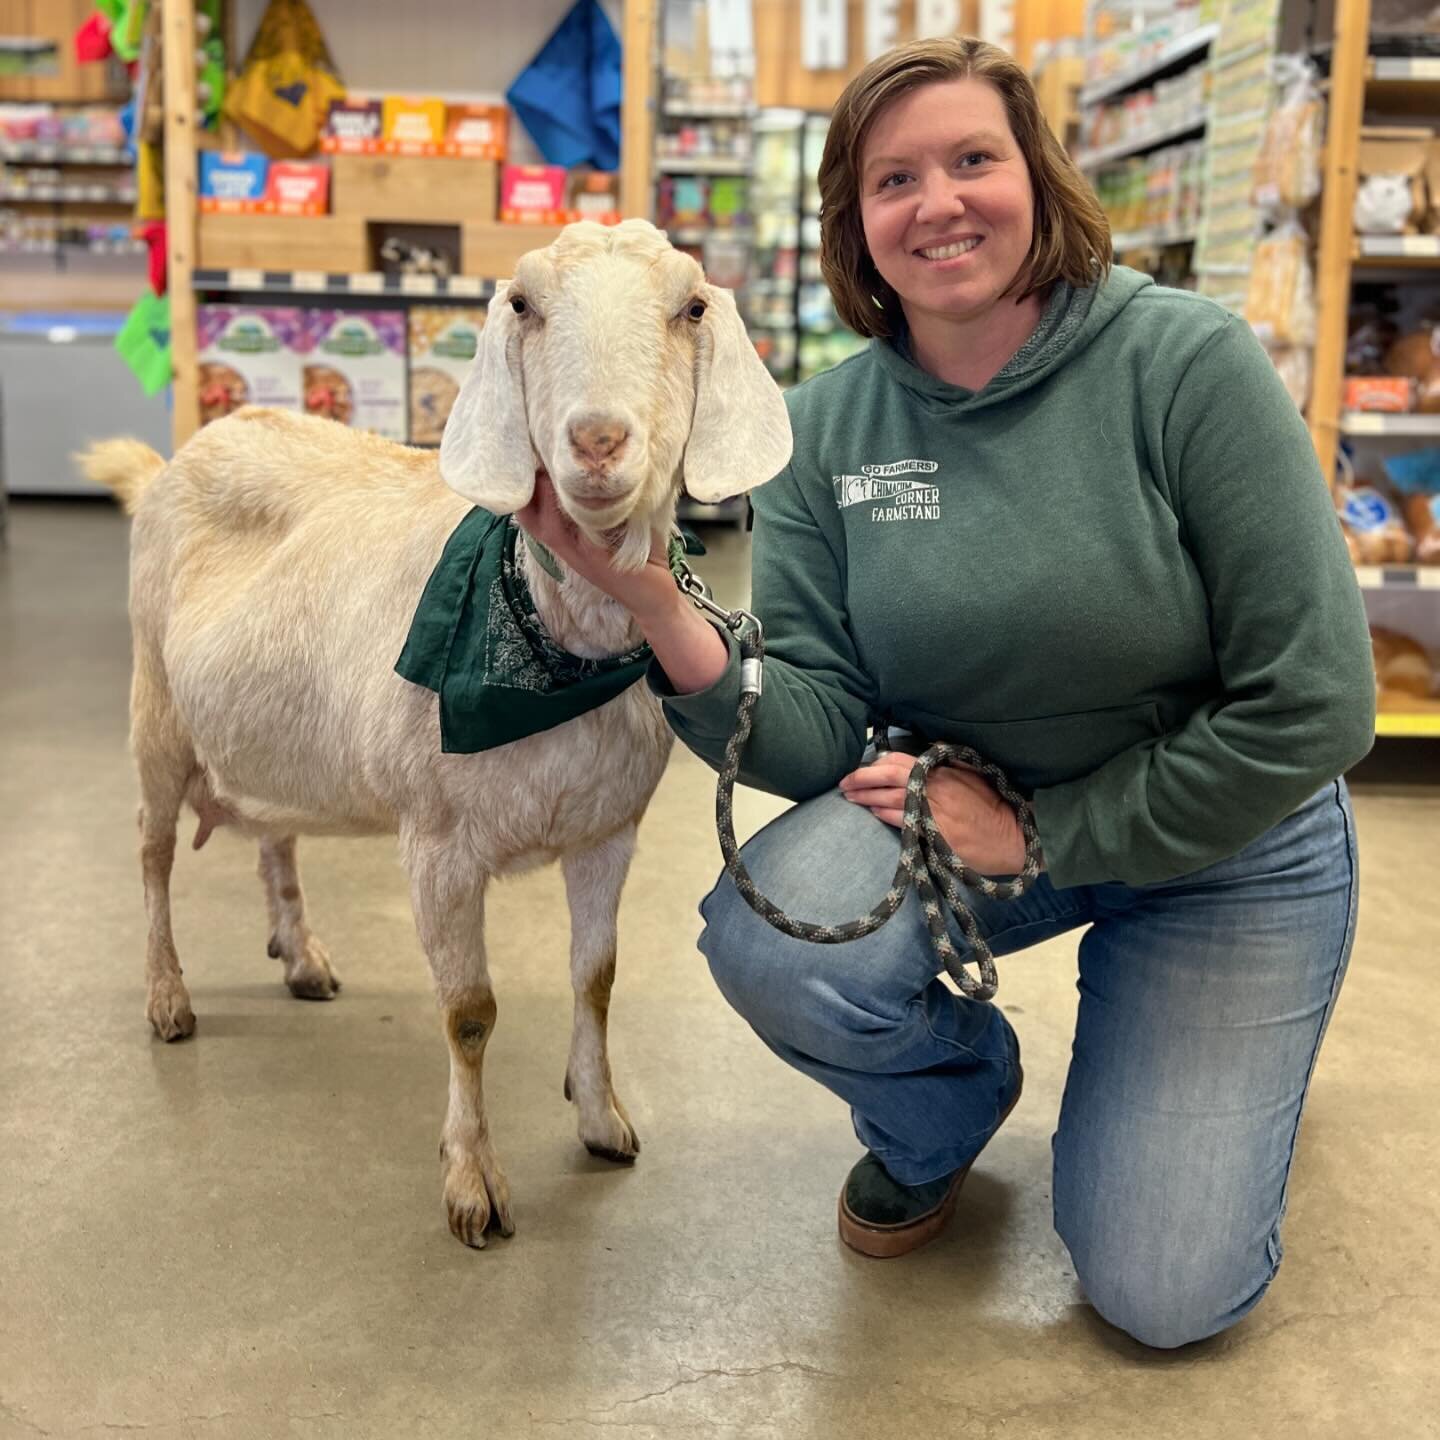 Did you catch Blossom and @farmernicole at opening day of the Port Townsend @jeffcofarmersmarkets ?!
.
.
Blossom made the rounds along with her other goat friends from @groundcontrolgoats spreading cheer and consuming lots of farm fresh treats. Thank